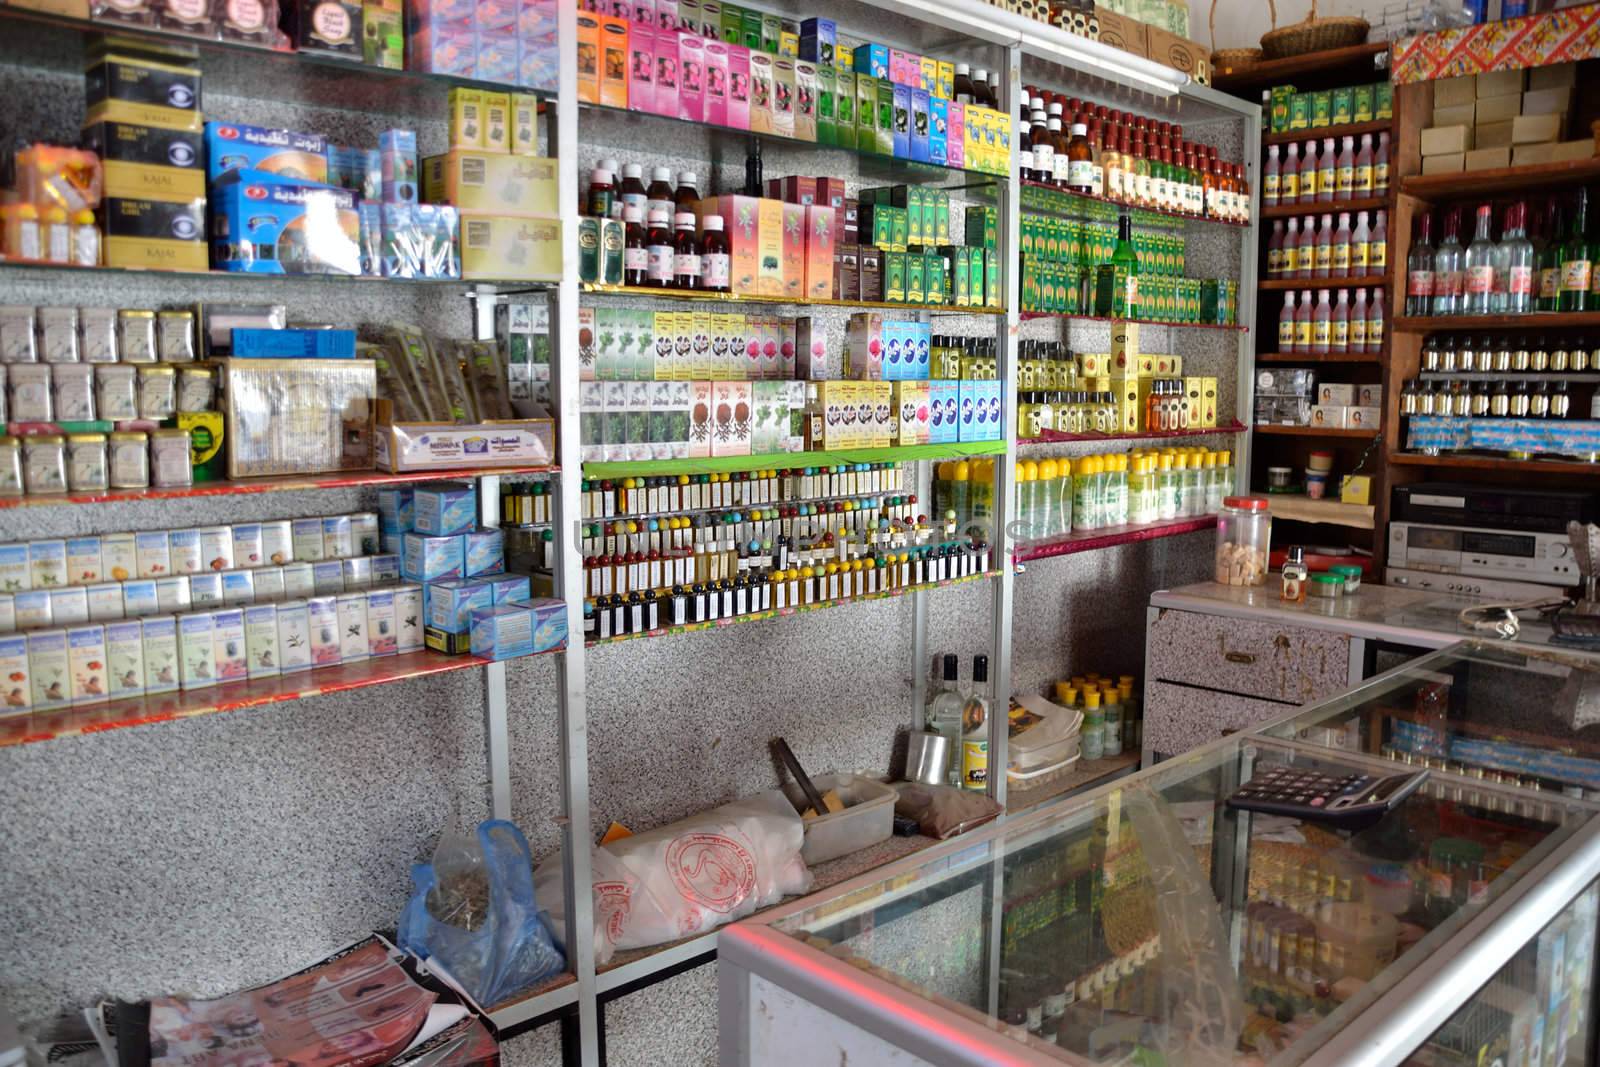 Arab pharmacy selling medical products without prescription in Tunisia.